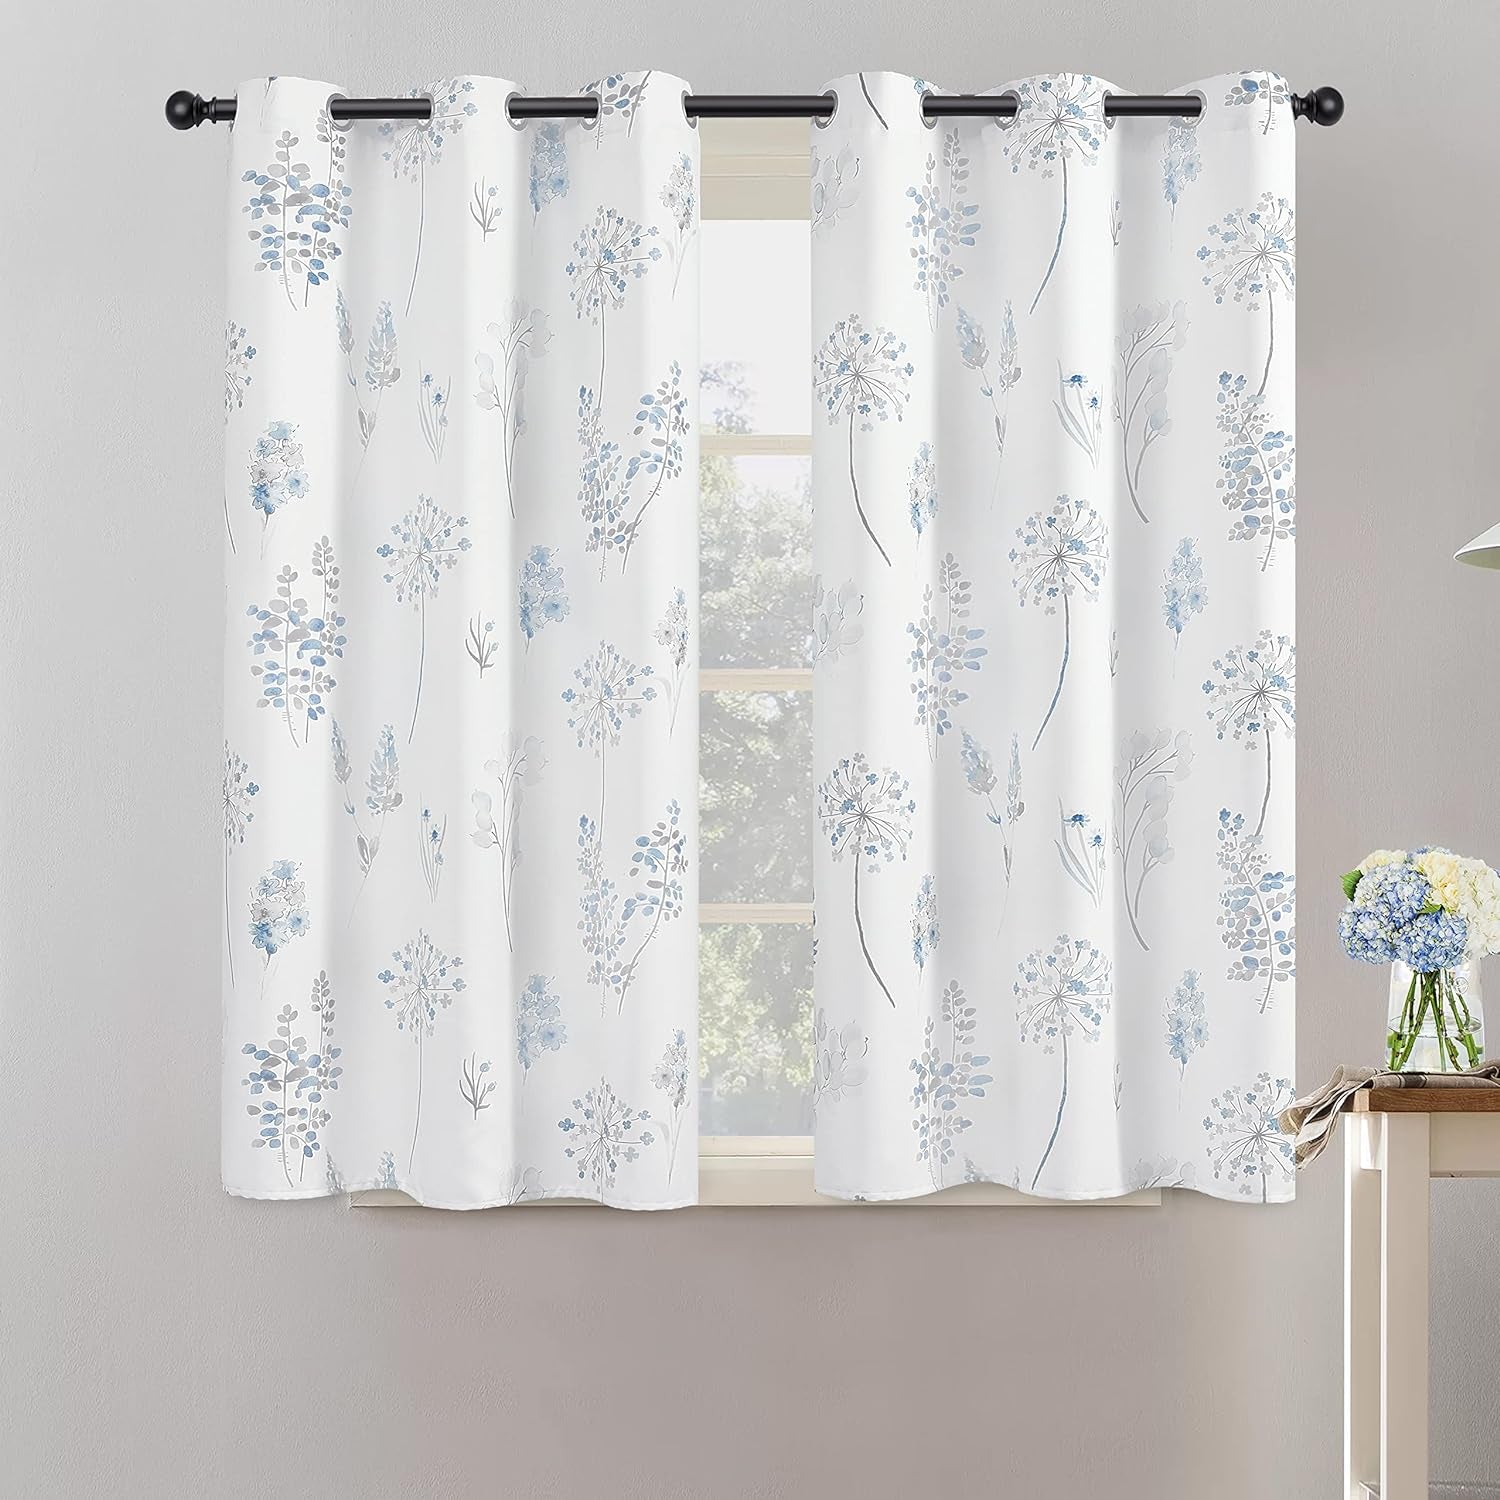 XTMYI 63 Inch Length Sage Green Window Curtains for Bedroom 2 Panels,Room Darkening Watercolor Floral Leaves 80% Blackout Flowered Printed Curtains for Living Room with Grommet,1 Pair Set  XTMYI Blue  Grey 34"X45" 